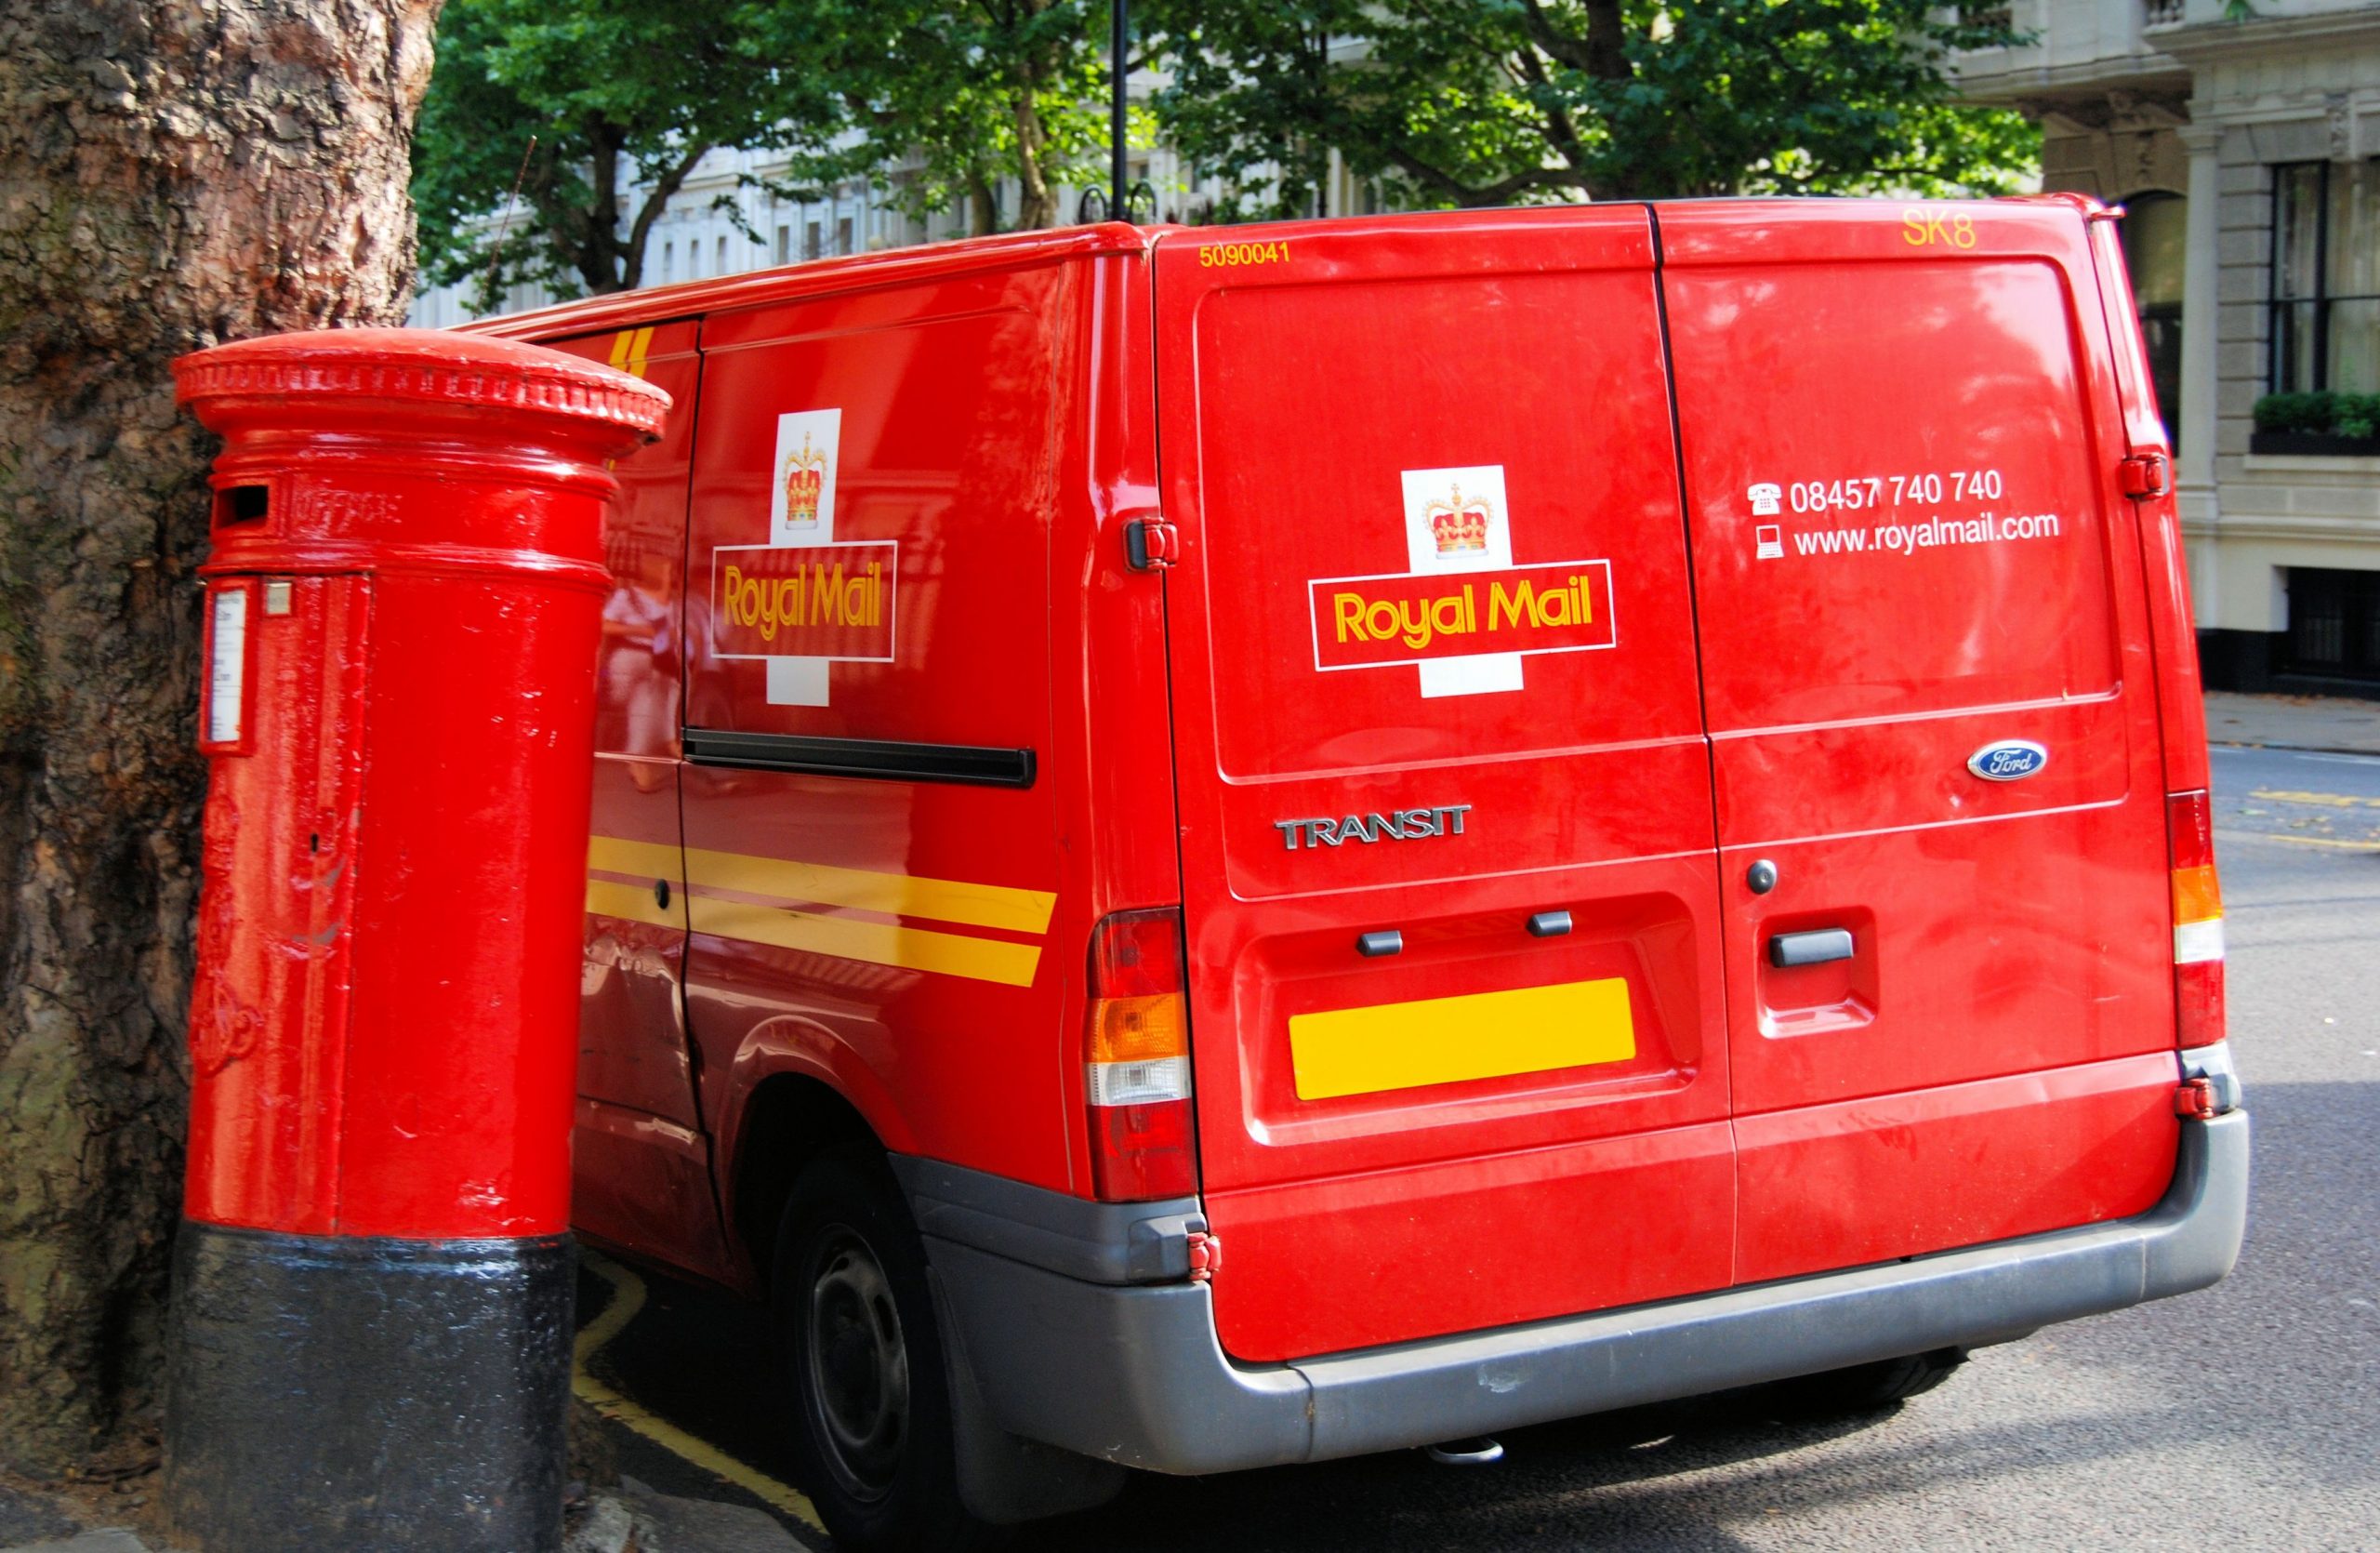 Independent retailers will be hit hard by Royal Mail’s parcel pick-up service